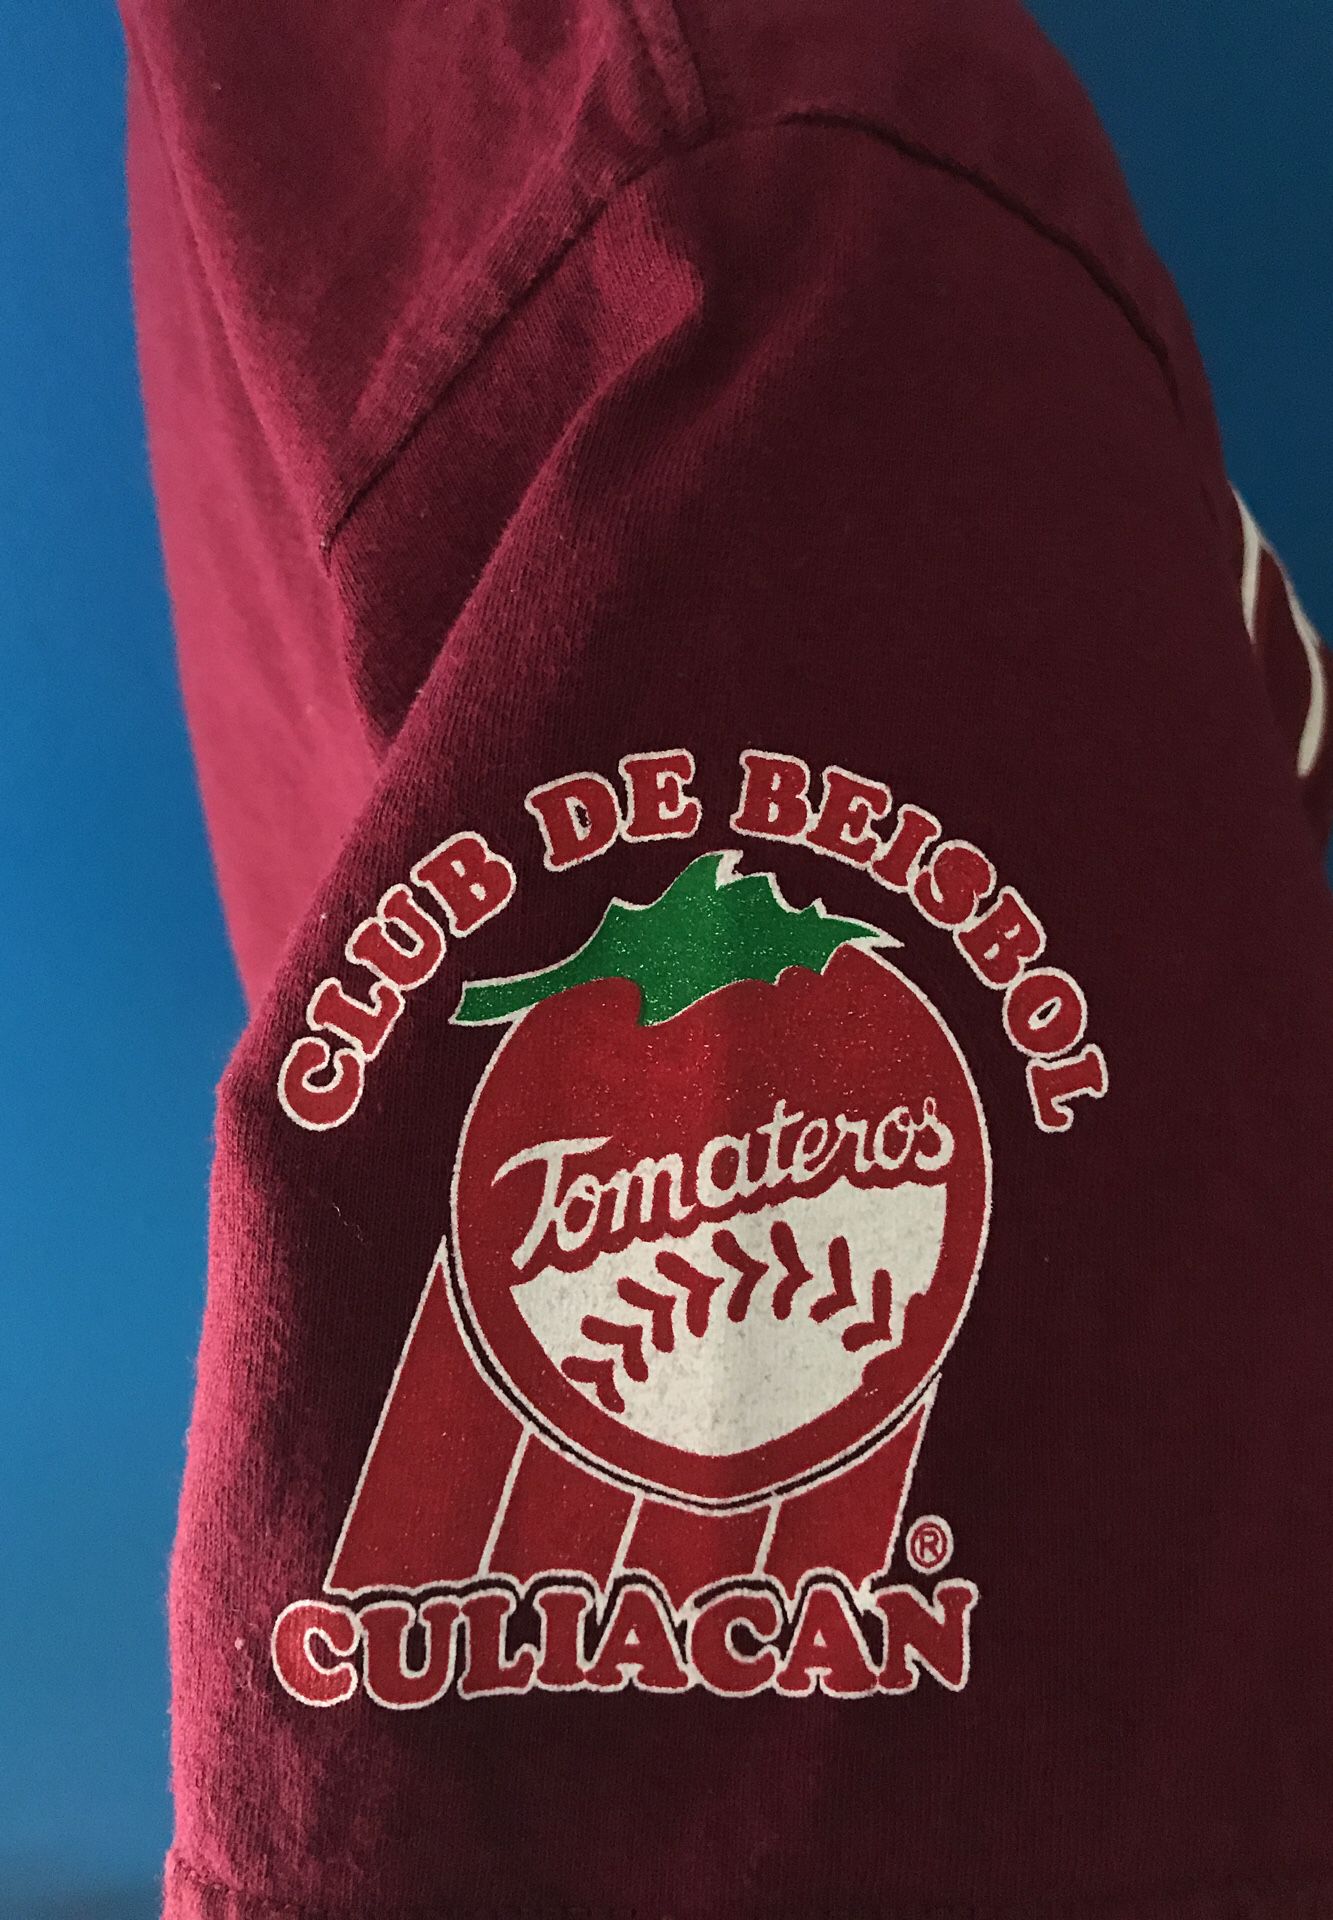 Tomateros de Culiacan Baseball Jersey for Sale in Ontario, CA - OfferUp